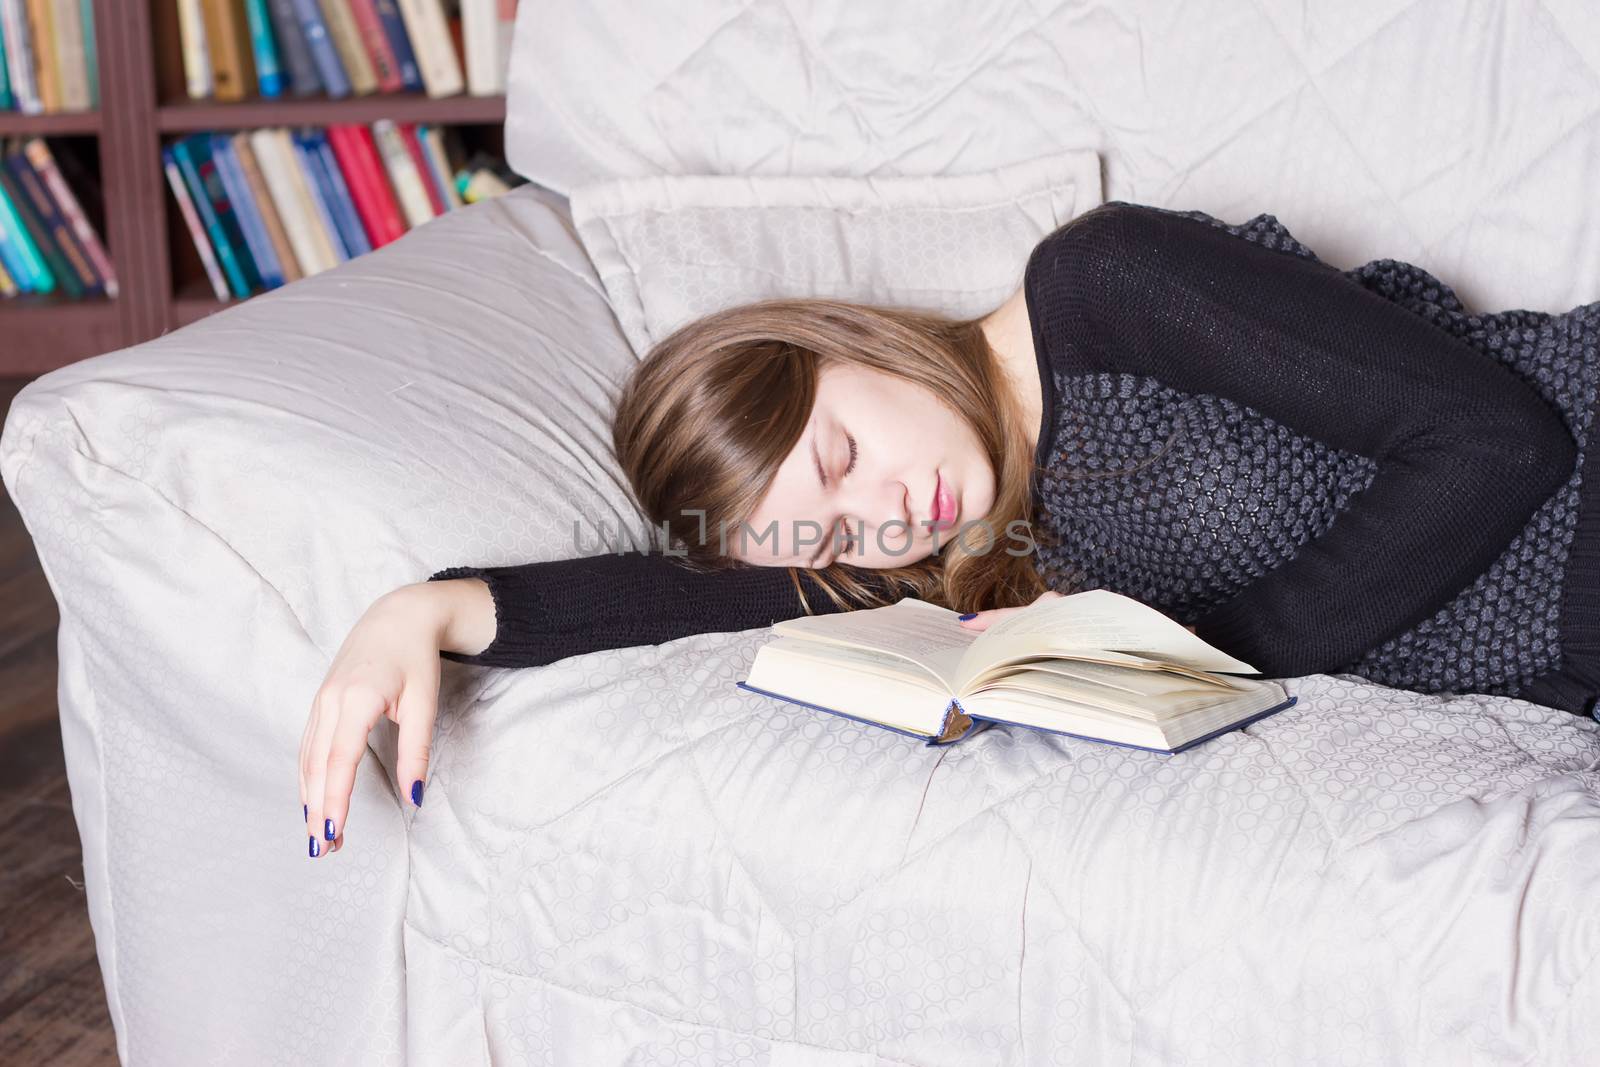 Cute girl sleeping while holding a book lying by victosha